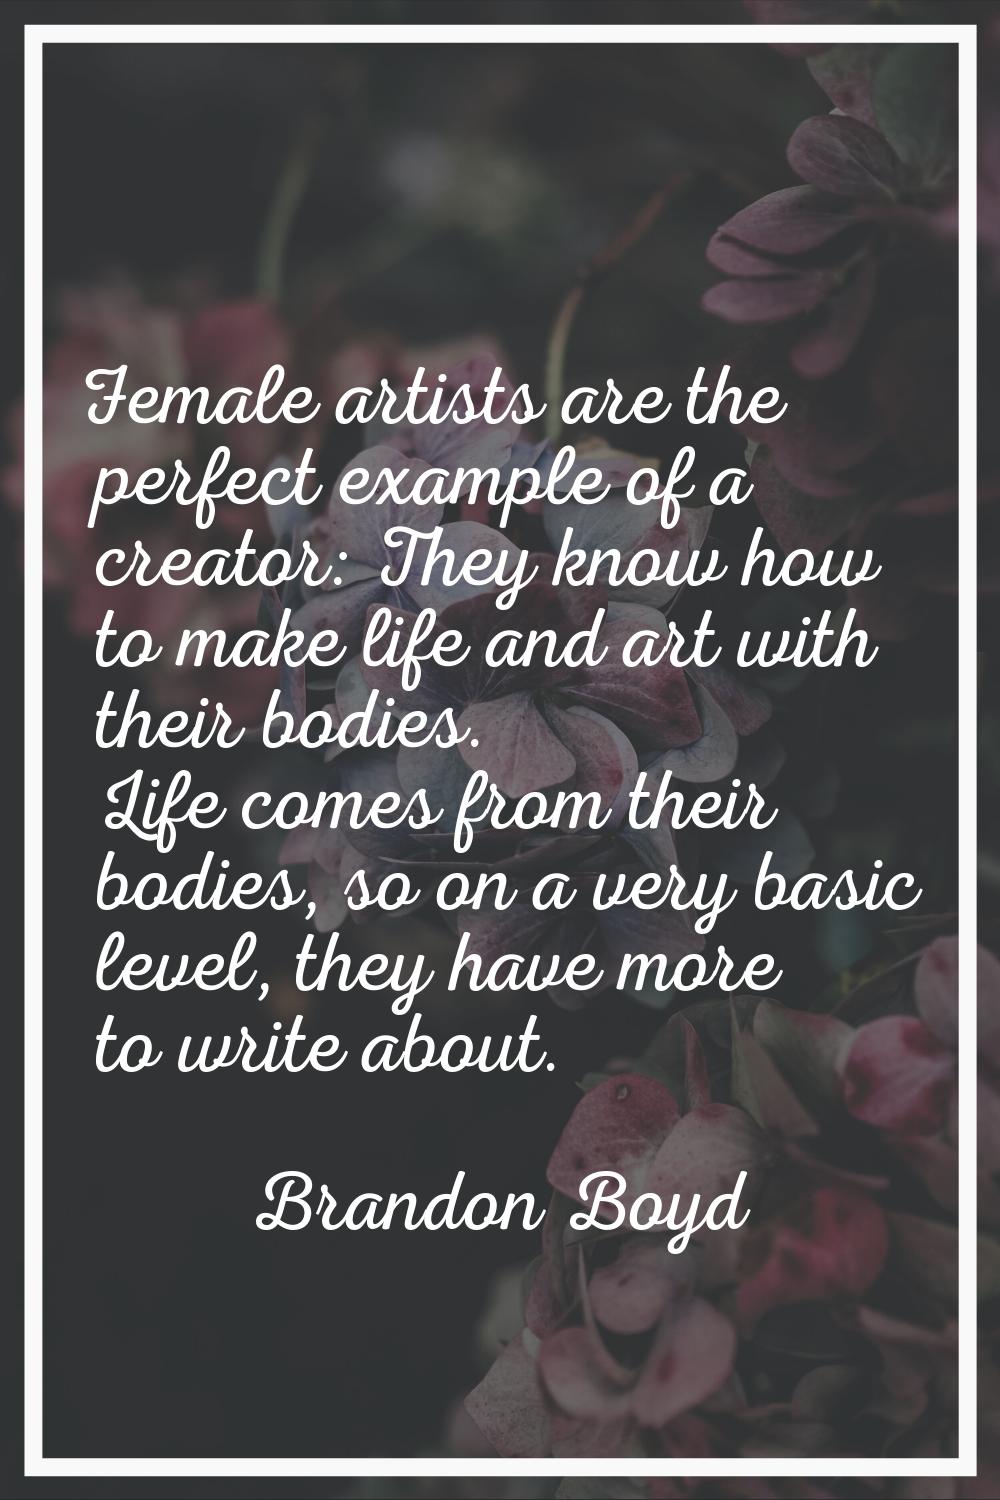 Female artists are the perfect example of a creator: They know how to make life and art with their 